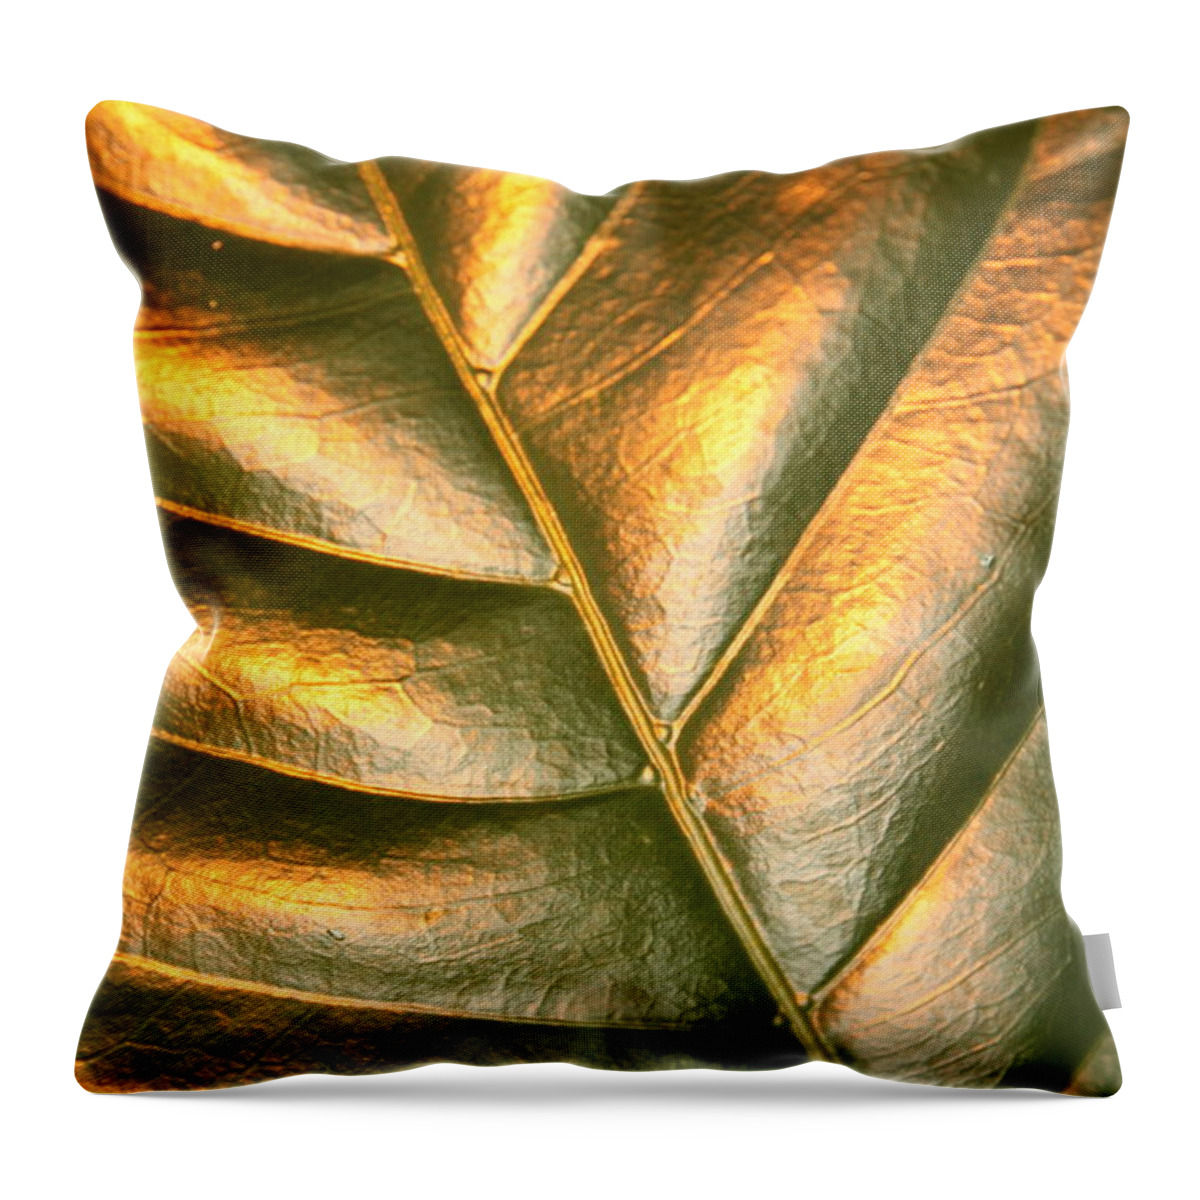 Gold Throw Pillow featuring the photograph Golden Leaf 2 by Carol Groenen